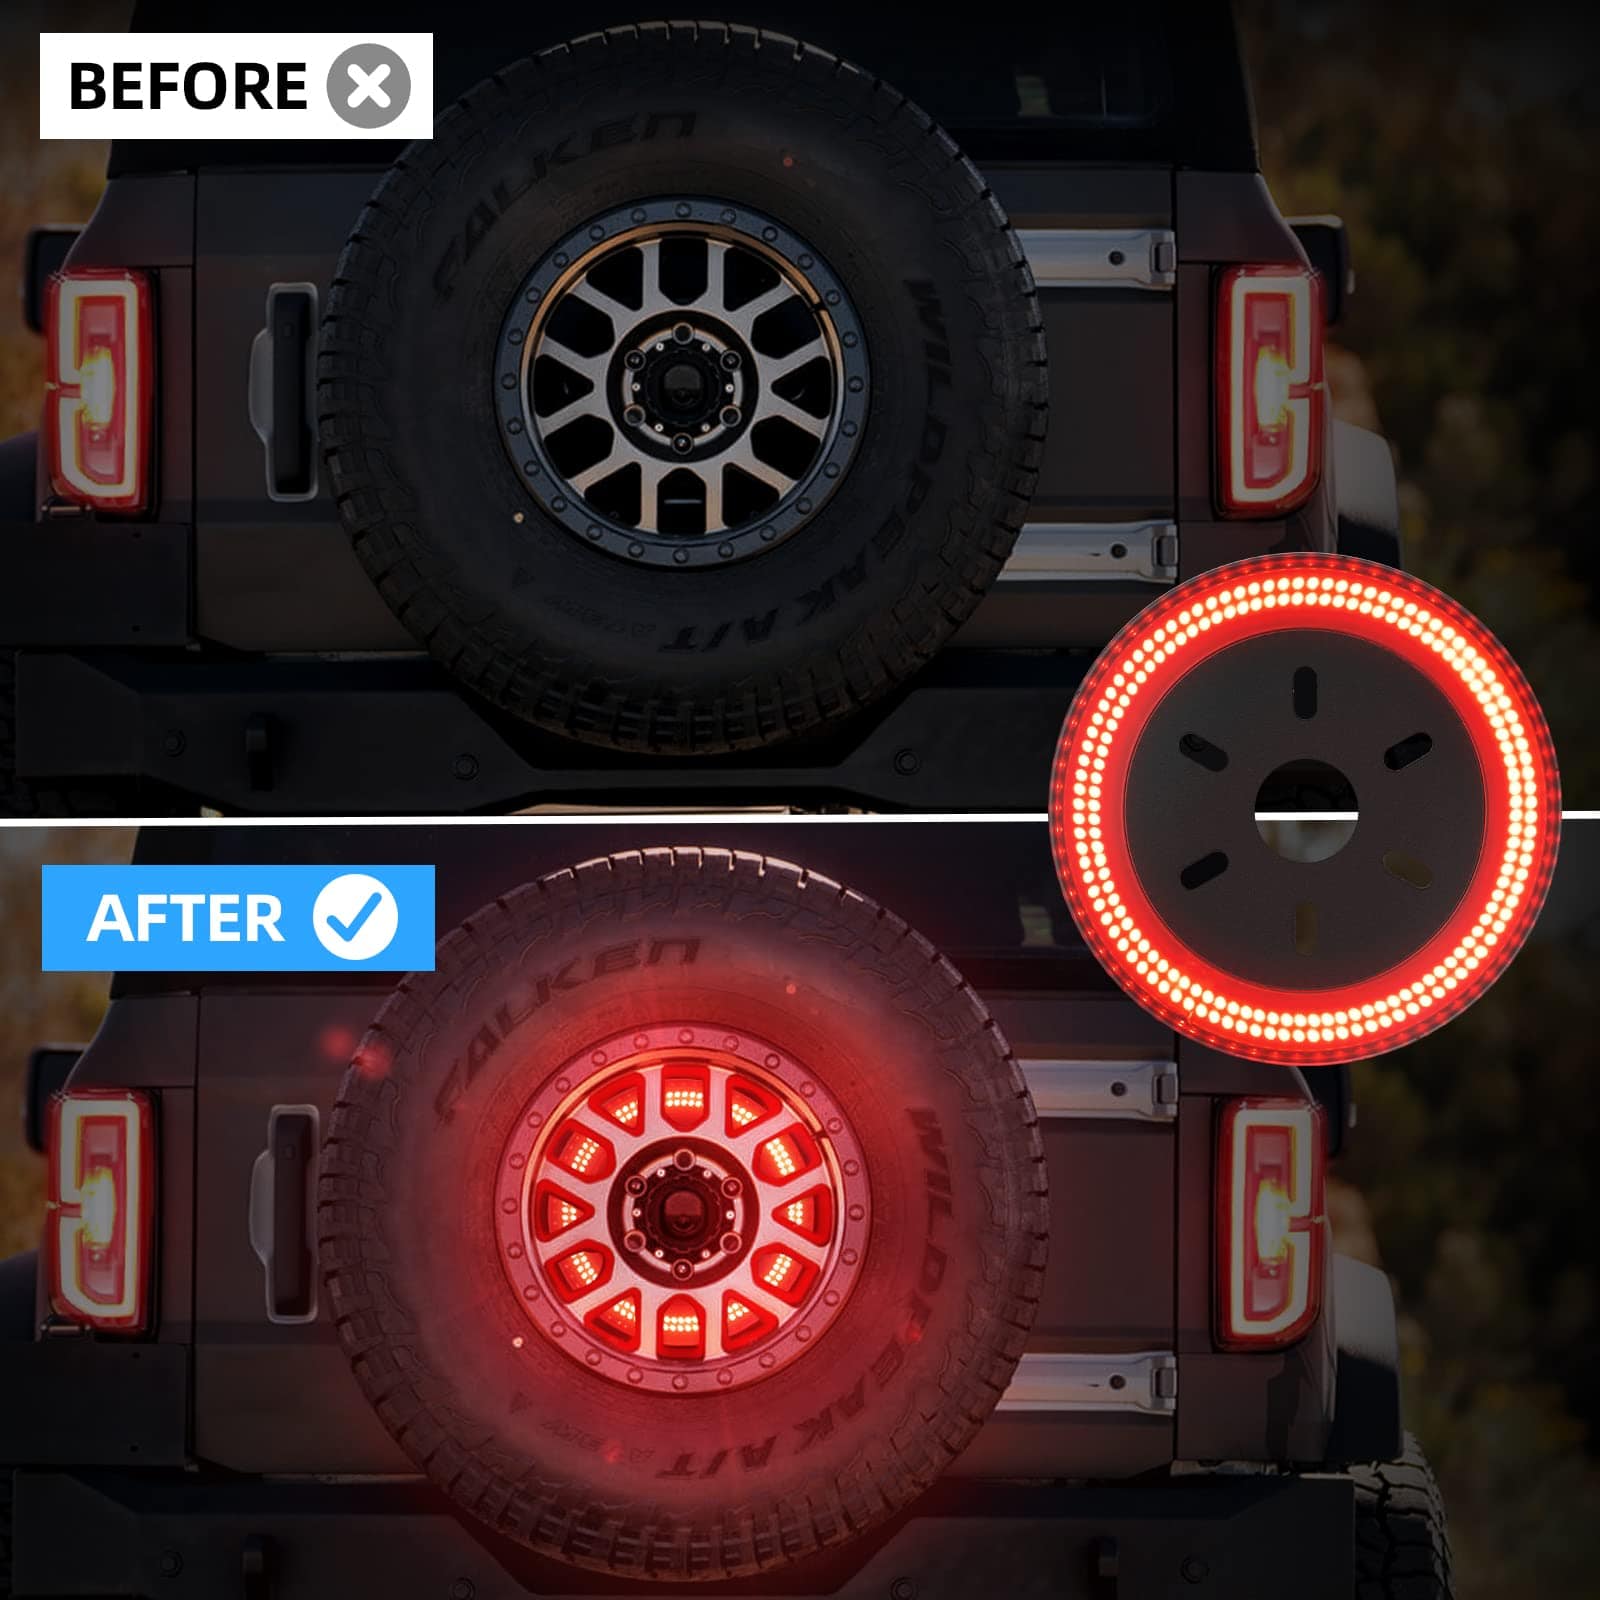 SUPAREE Ford Brake Light Ford Bronco Spare Tire Light 3-Sided with Plug-N-Play for 2021 2022 2023 Product description